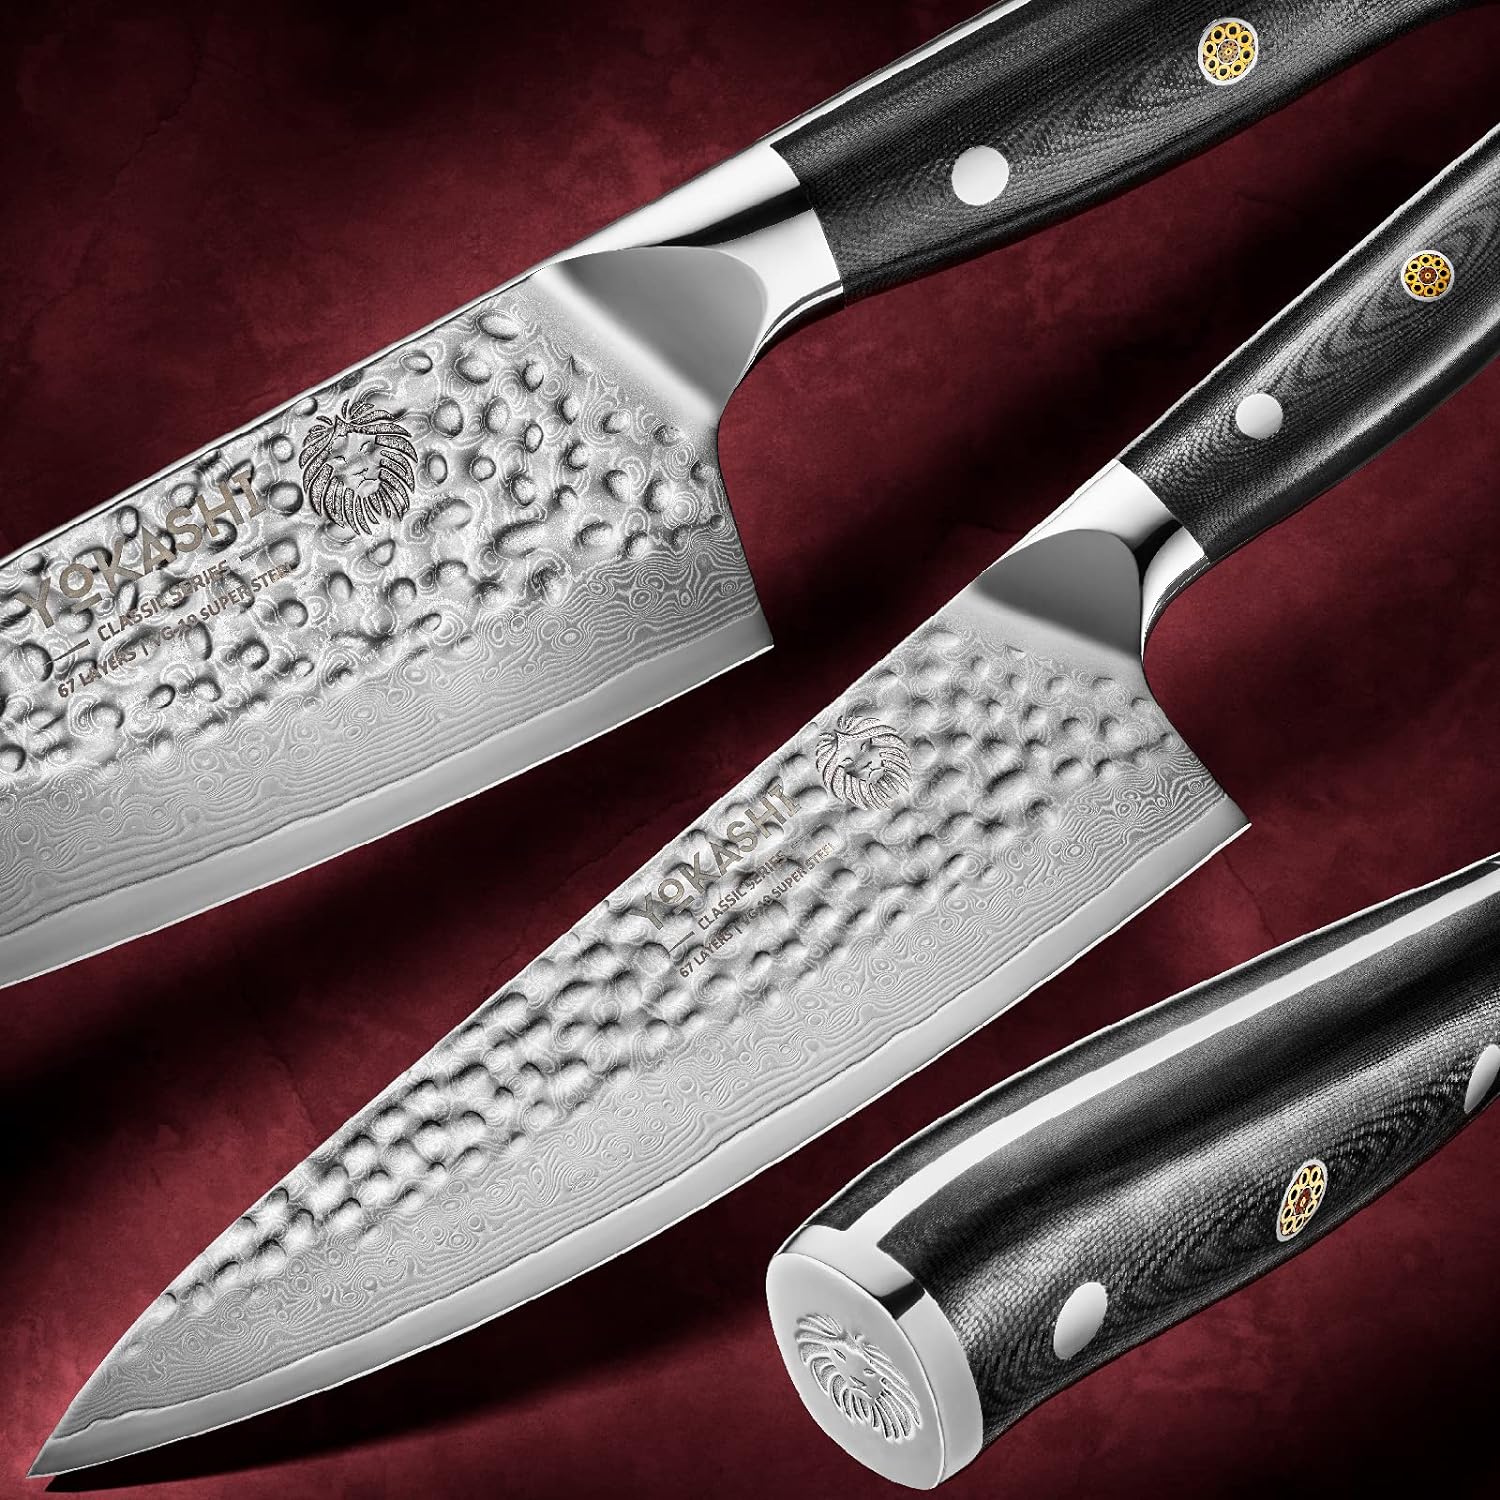 Japanese Knife - Damascus Chef Knife 8-inch - Superior Edge Retention for Precise Chopping, Slicing  Dicing for Professional Chefs and Home Cooks in the Kitchen - Durable Steel